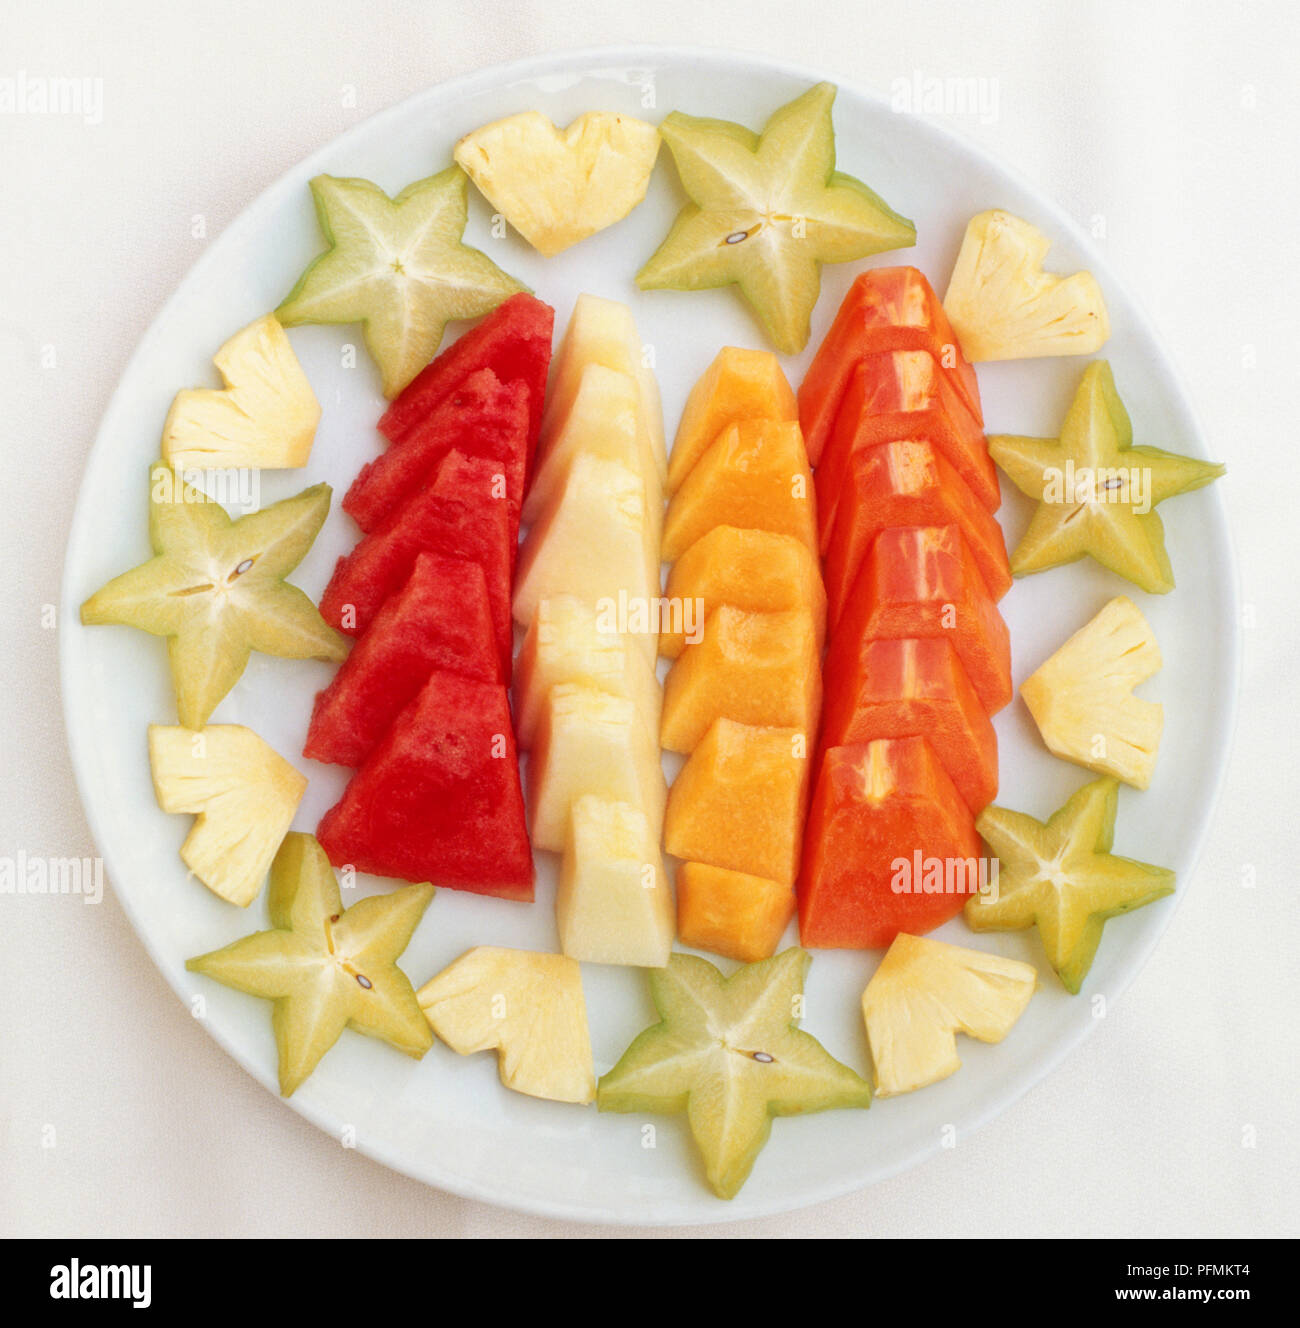 Dish of brightly coloured sliced fruits; pineapple, starfruit, papaya, rock melon, honeydew melon, and watermelon, popularly served in Singapore. Stock Photo